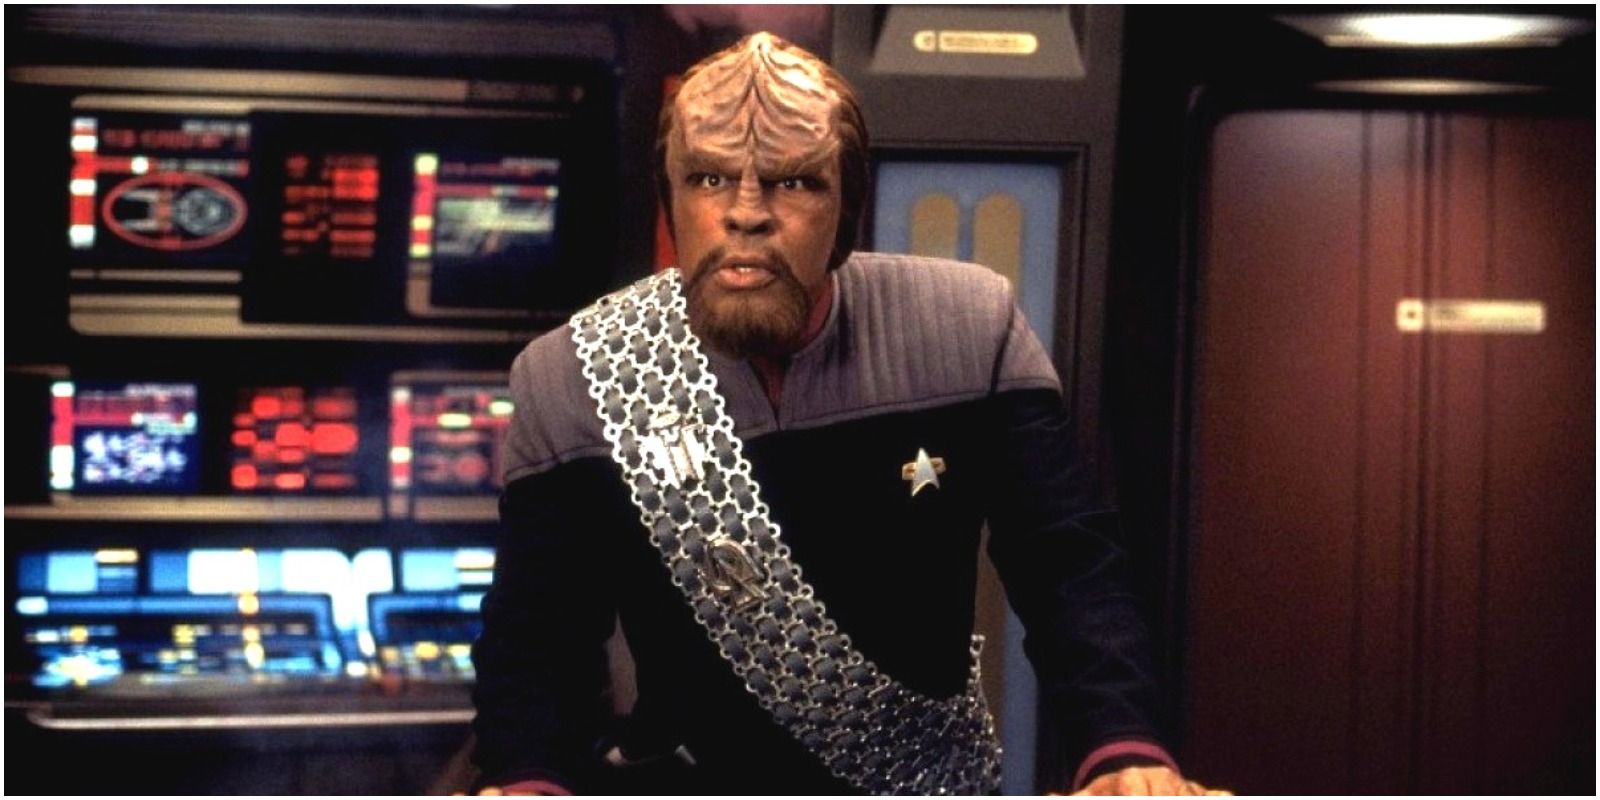 Worf commanding the USS Defiant from DS9